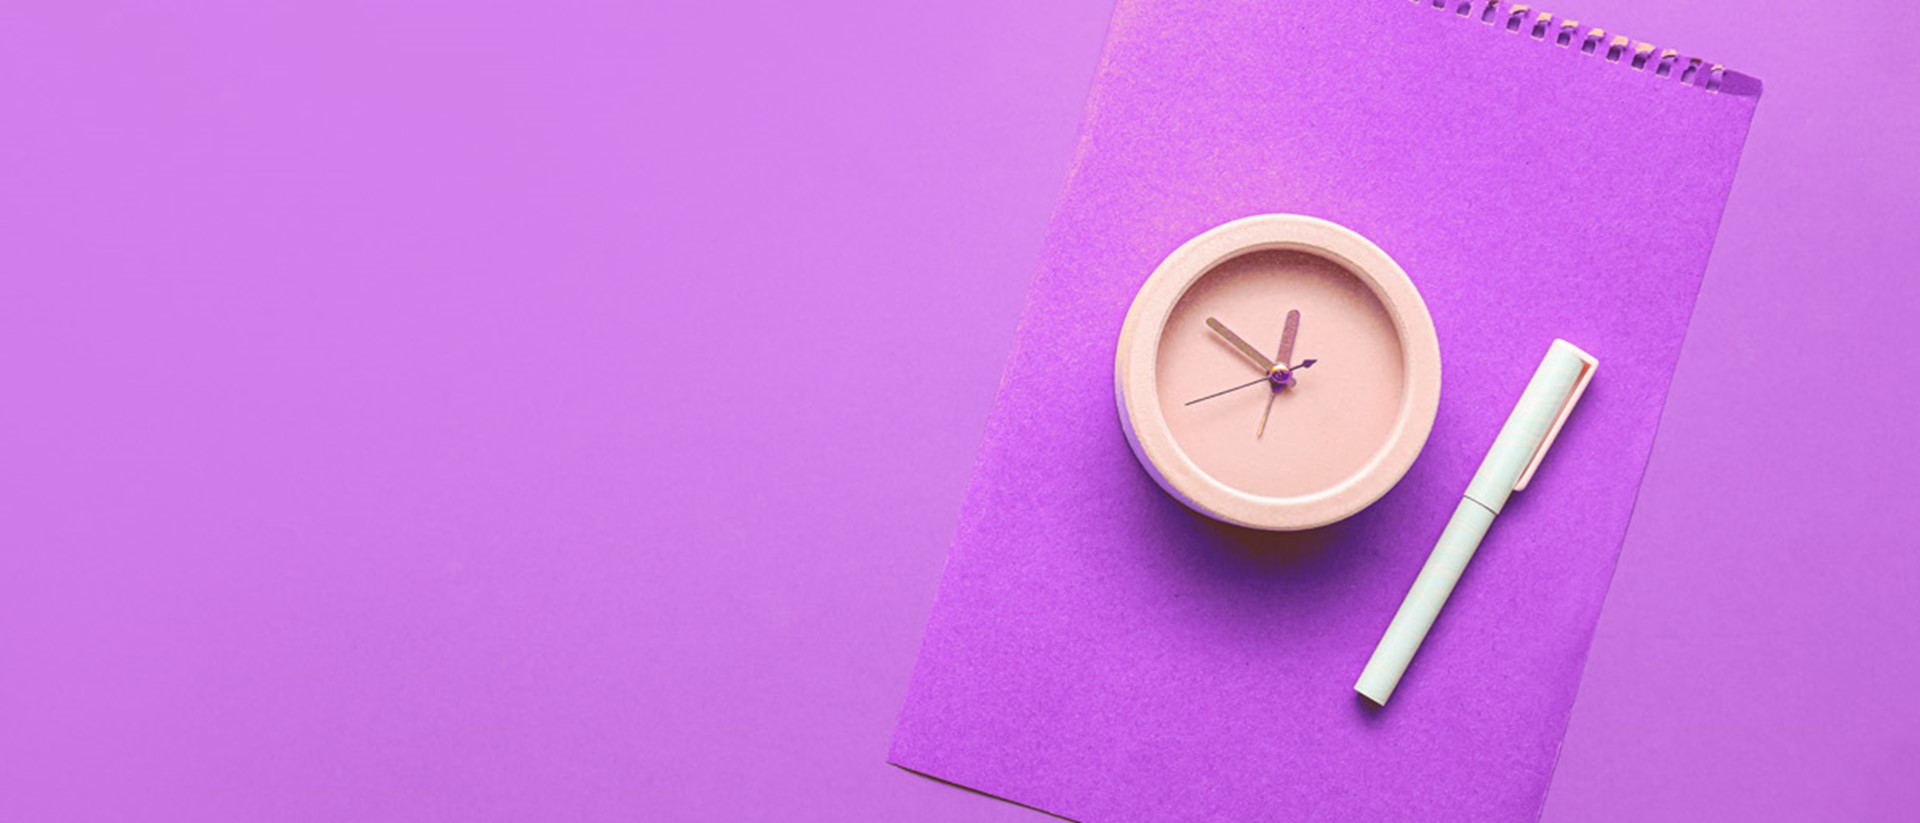 A peach coloured clock and a white pen on top of a purple folder against a purple background